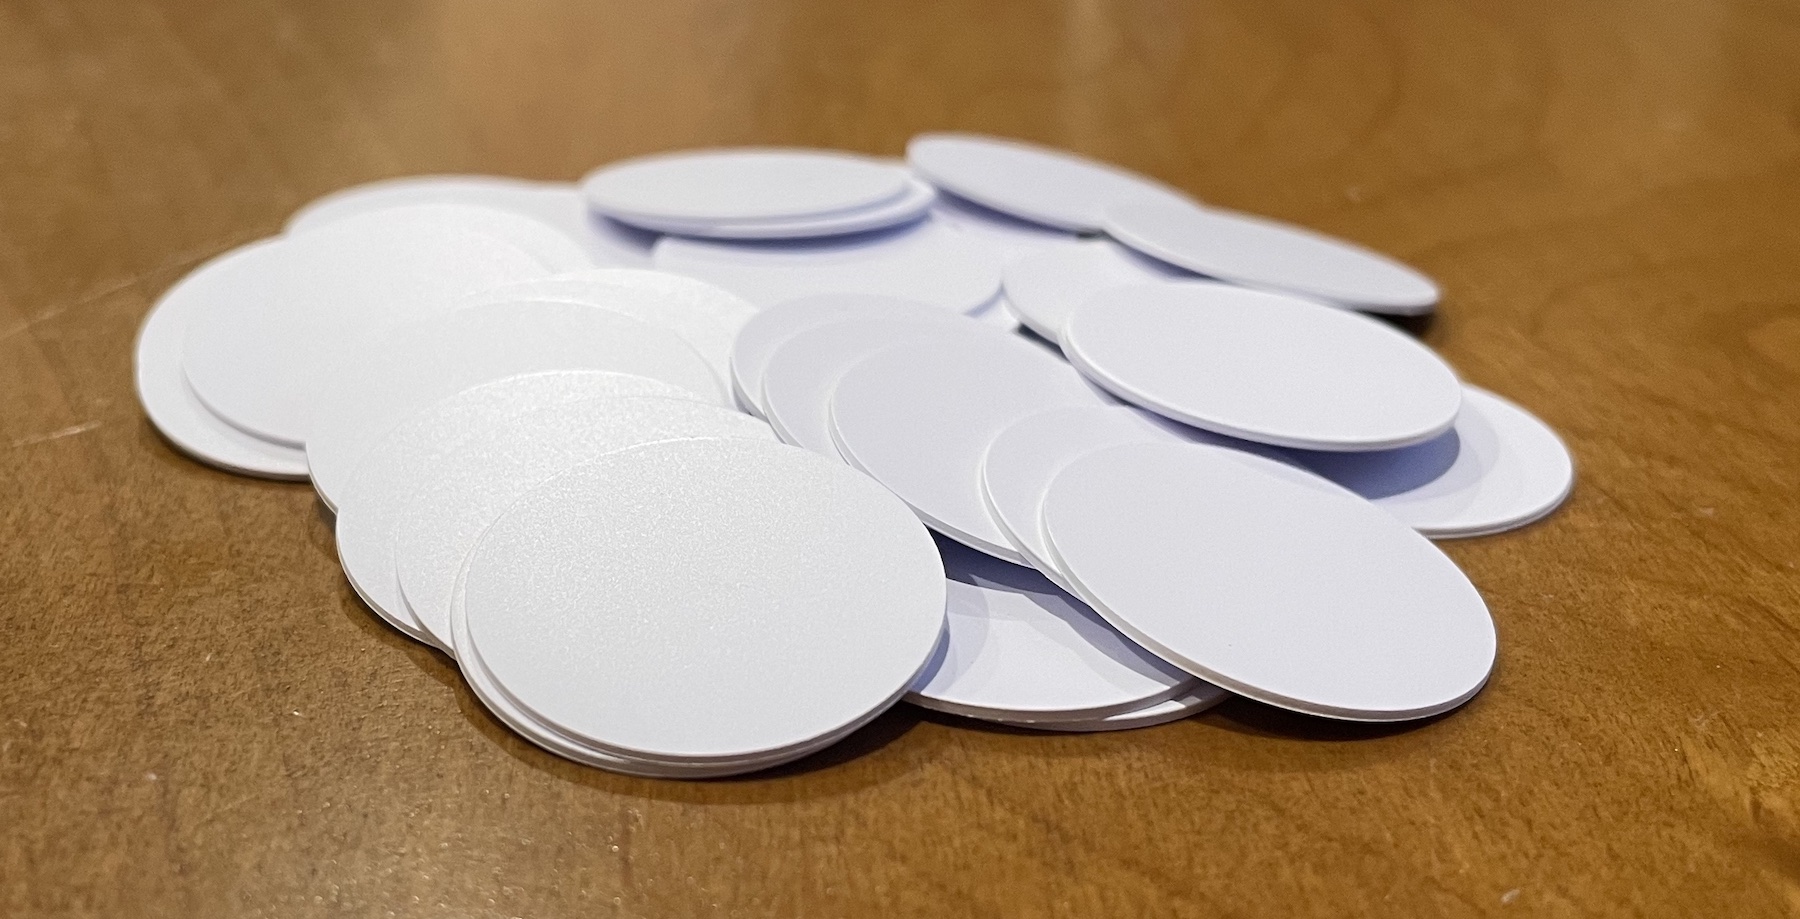 Picture of circular NFC tags